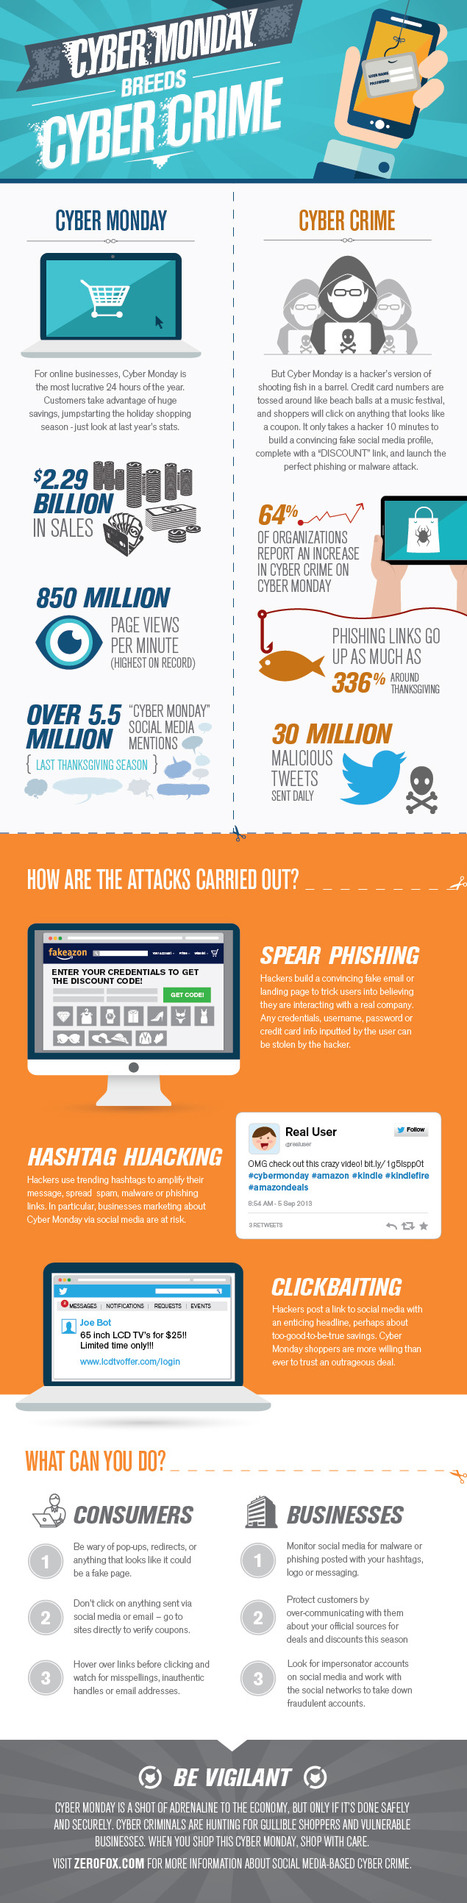 How hackers are stealing this Cyber Monday (Infographic) | CyberSecurity | Phishing | 21st Century Learning and Teaching | Scoop.it